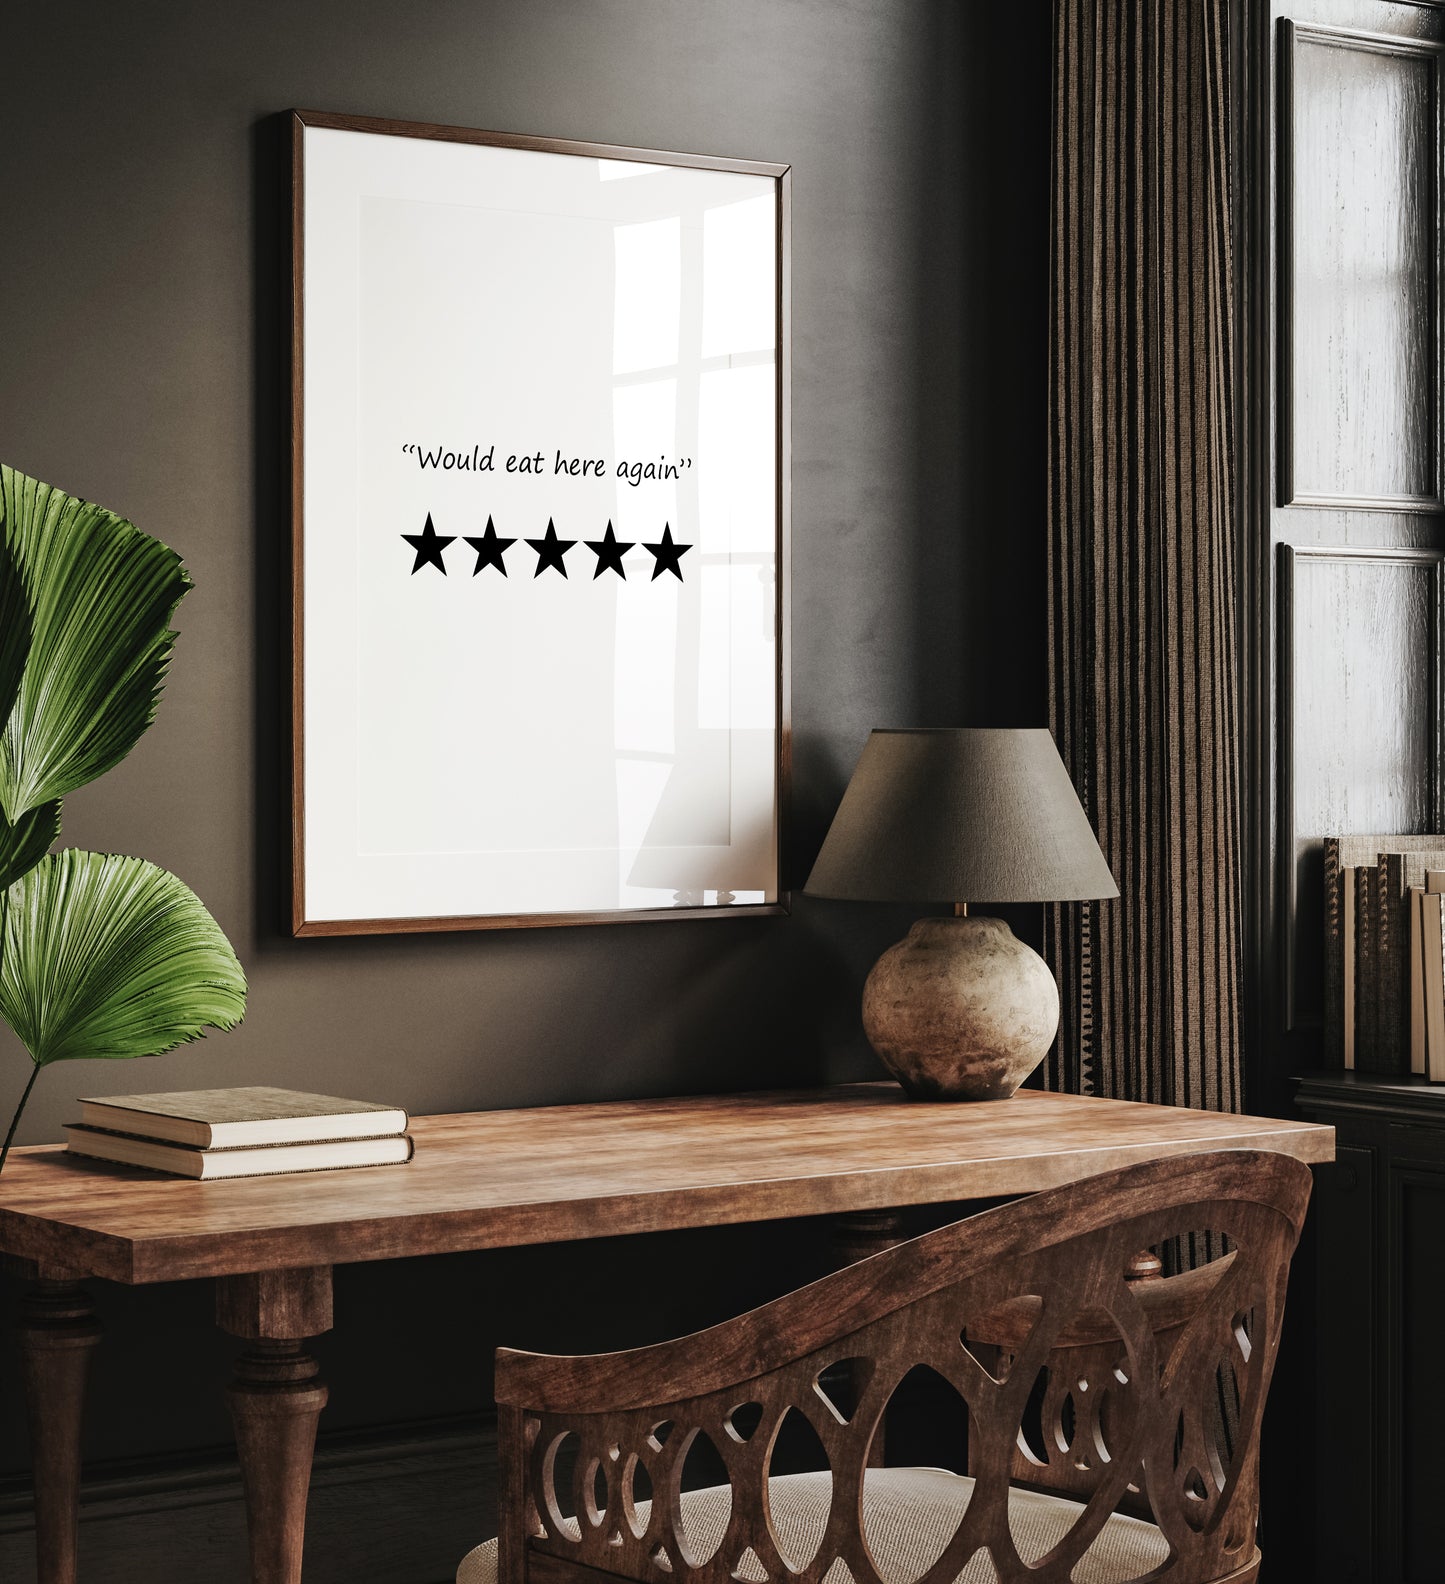 Would Eat Here Again 5 Stars Funny Kitchen Review Print - Magic Posters